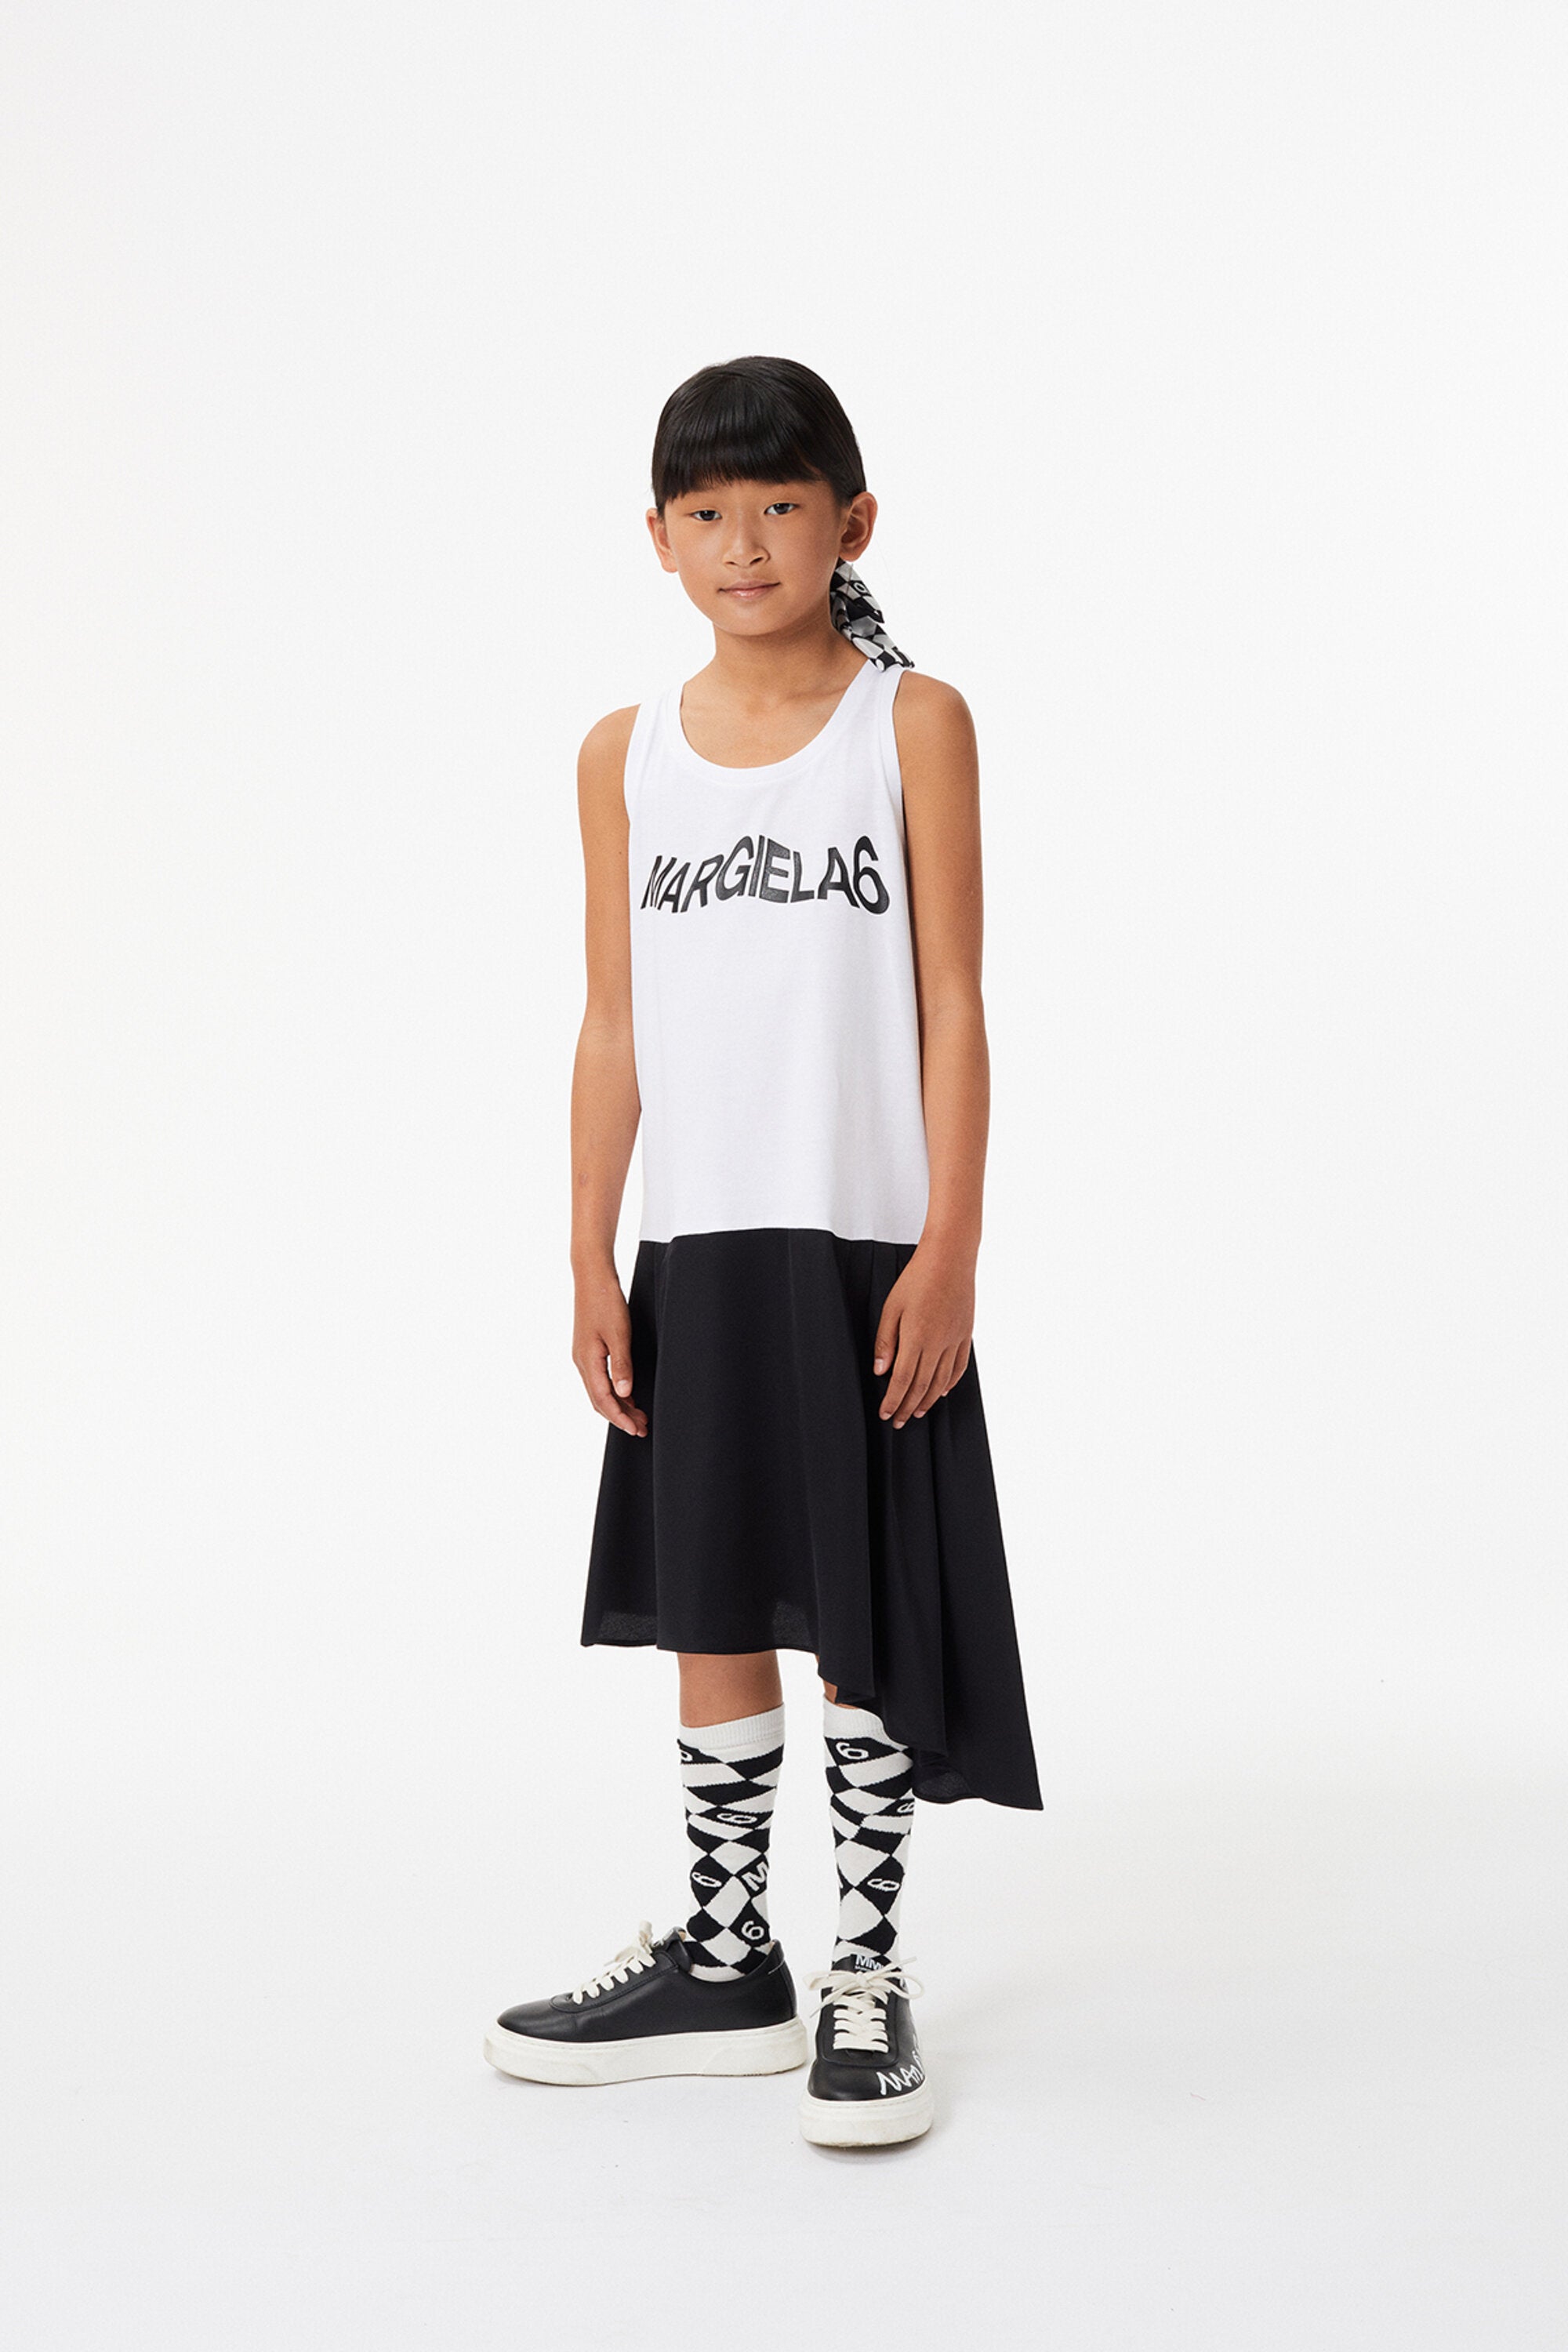 Black and white sleeveless jersey dress with asymmetric skirt and logo